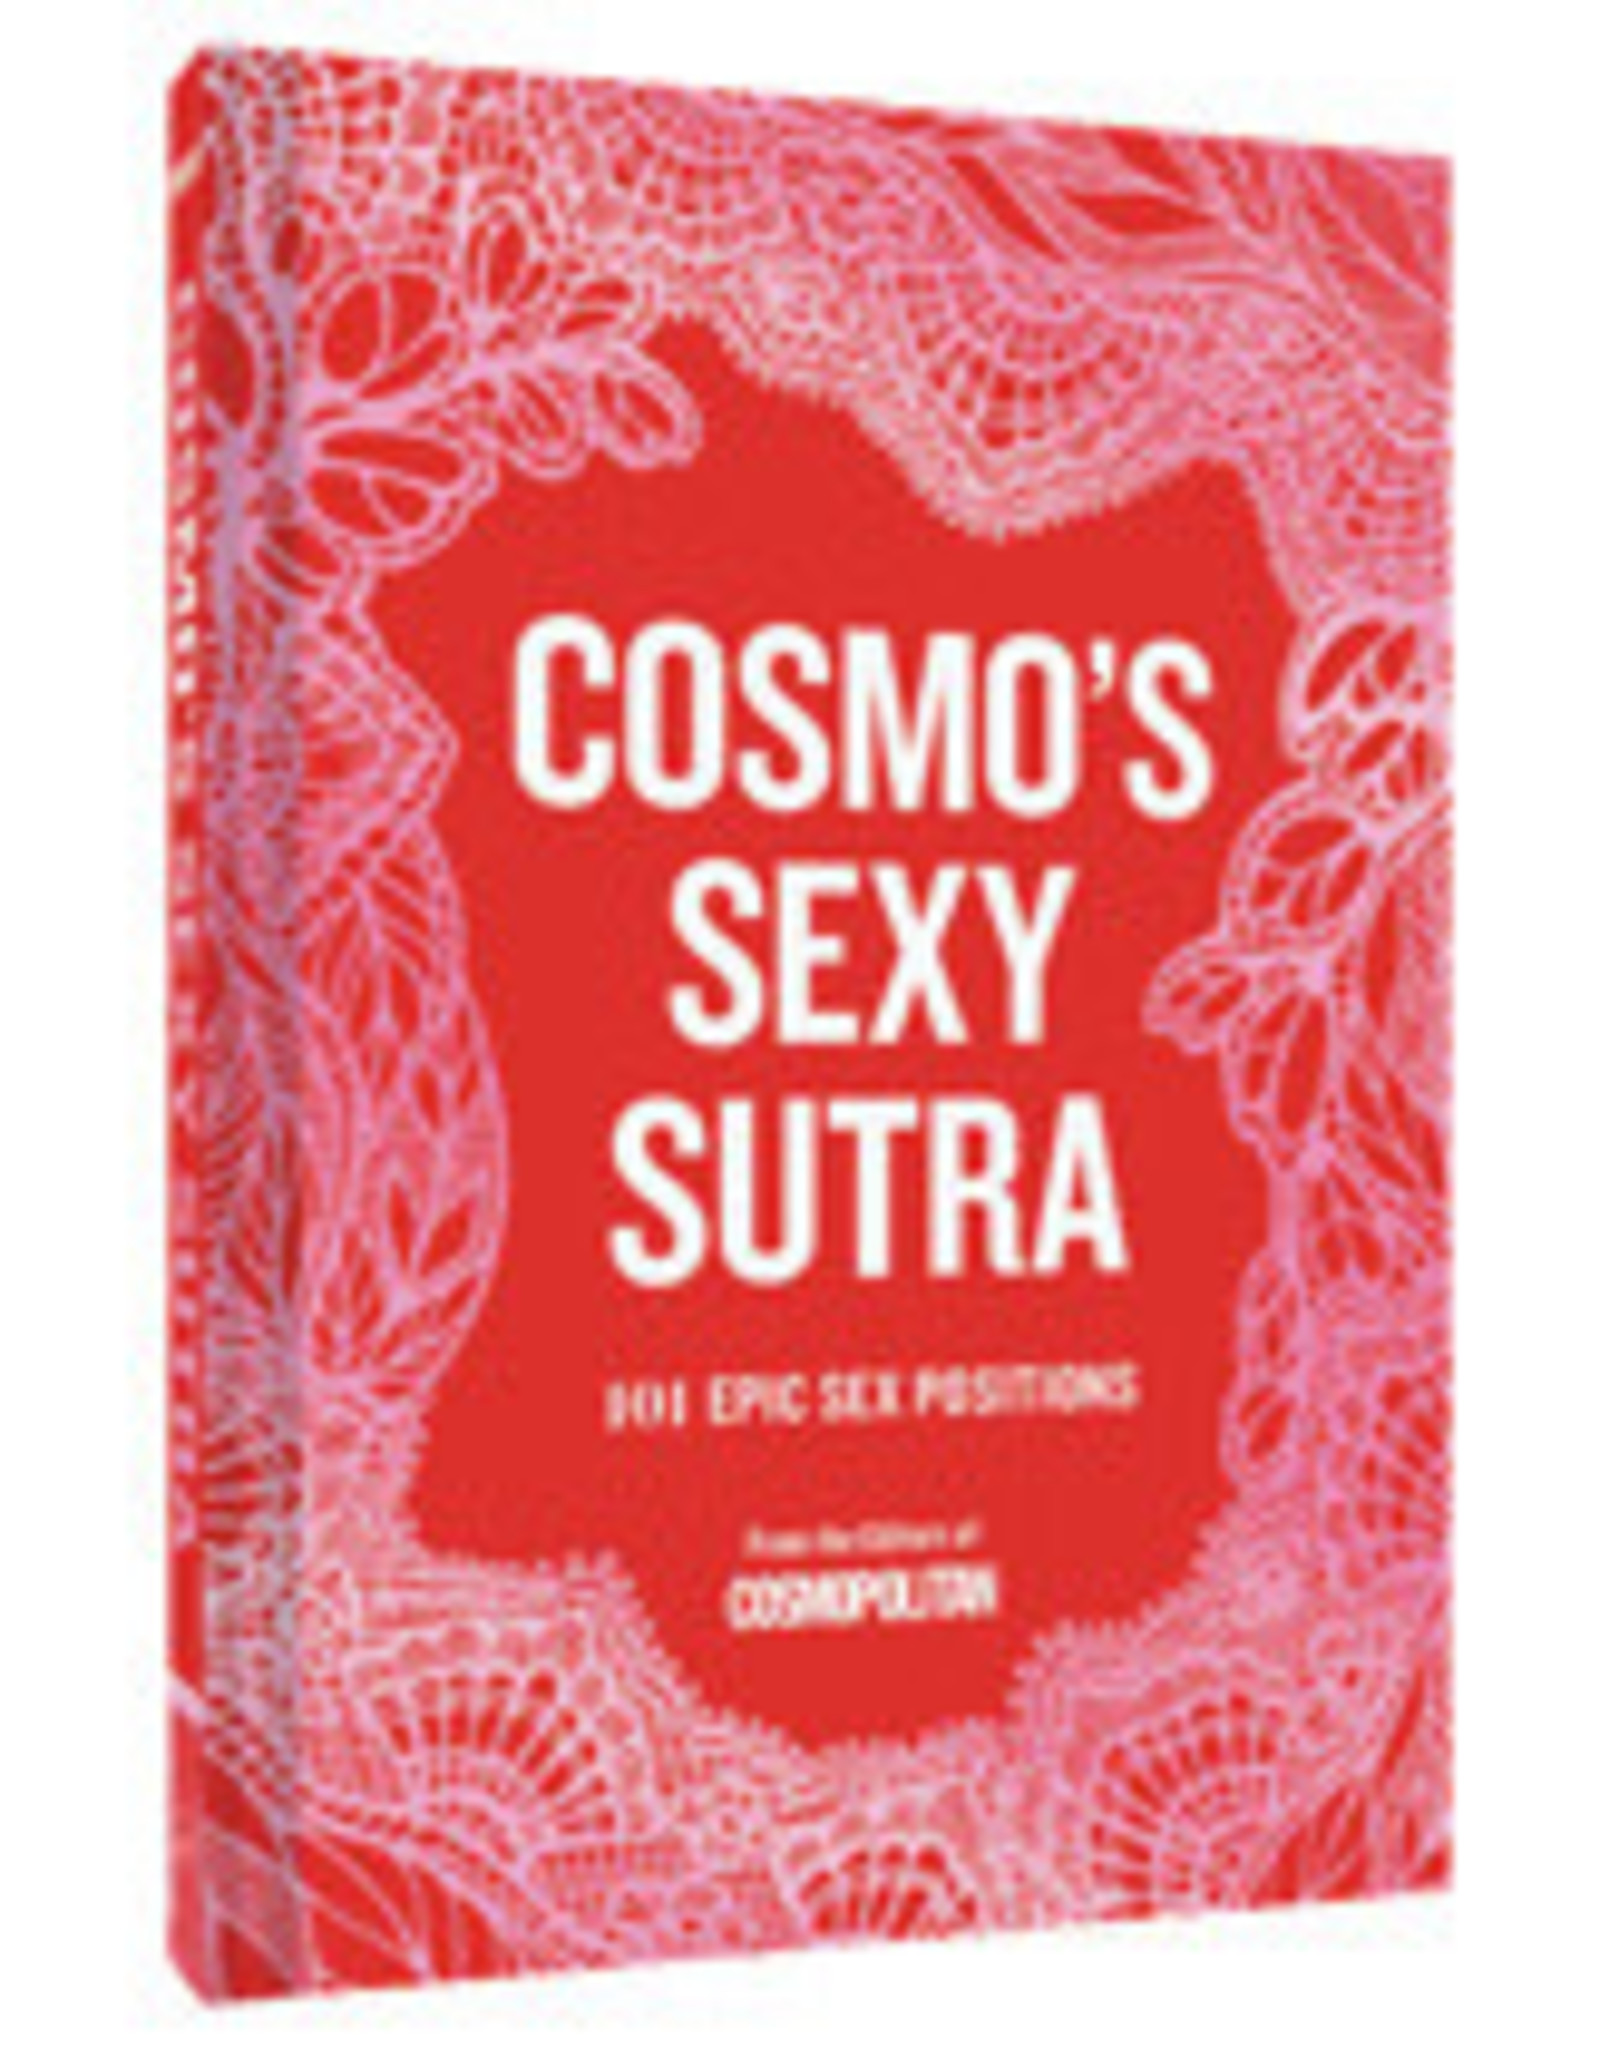 Cosmo's Sexy Sutra Book